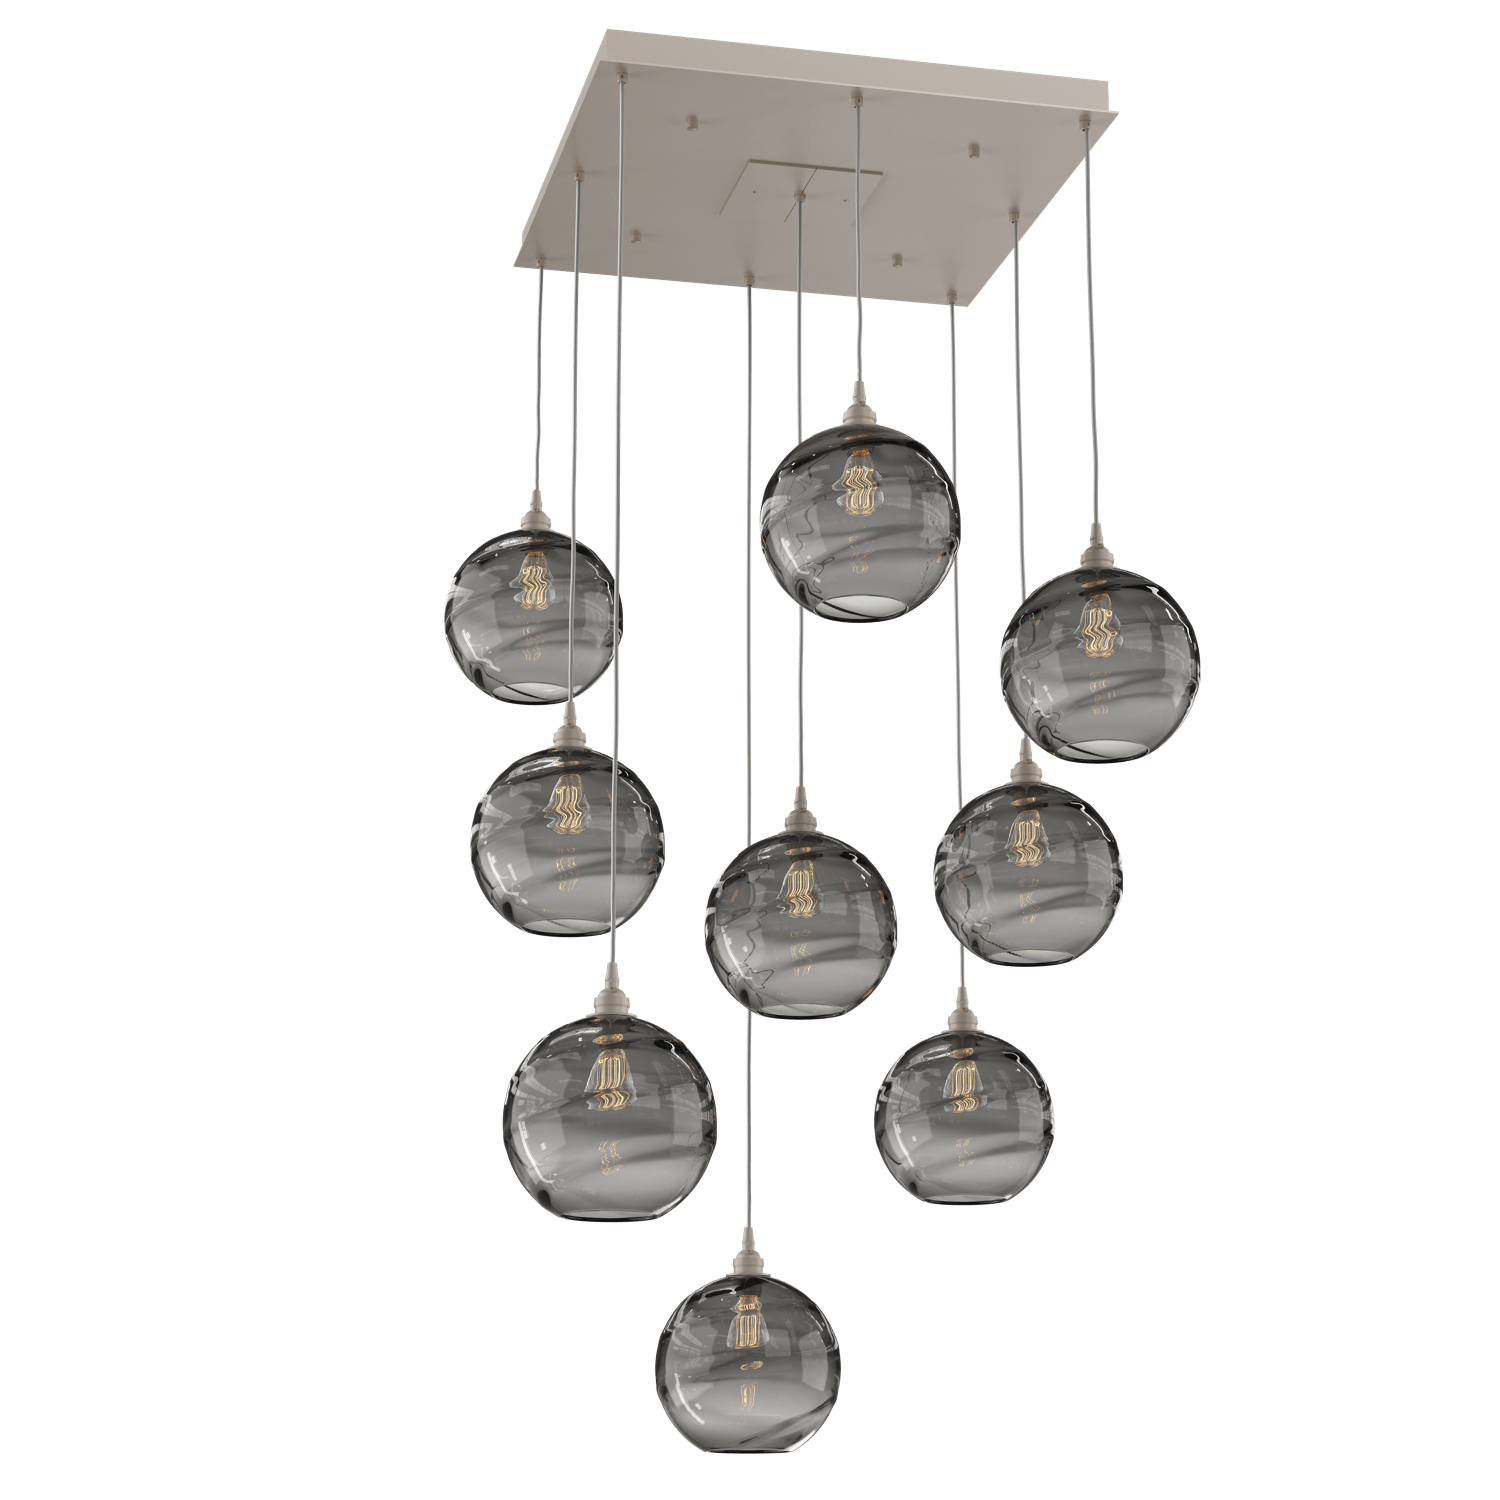 CHB0047-09-BS-OS-Hammerton-Studio-Optic-Blown-Glass-Terra-9-light-square-pendant-chandelier-with-metallic-beige-silver-finish-and-optic-smoke-blown-glass-shades-and-incandescent-lamping